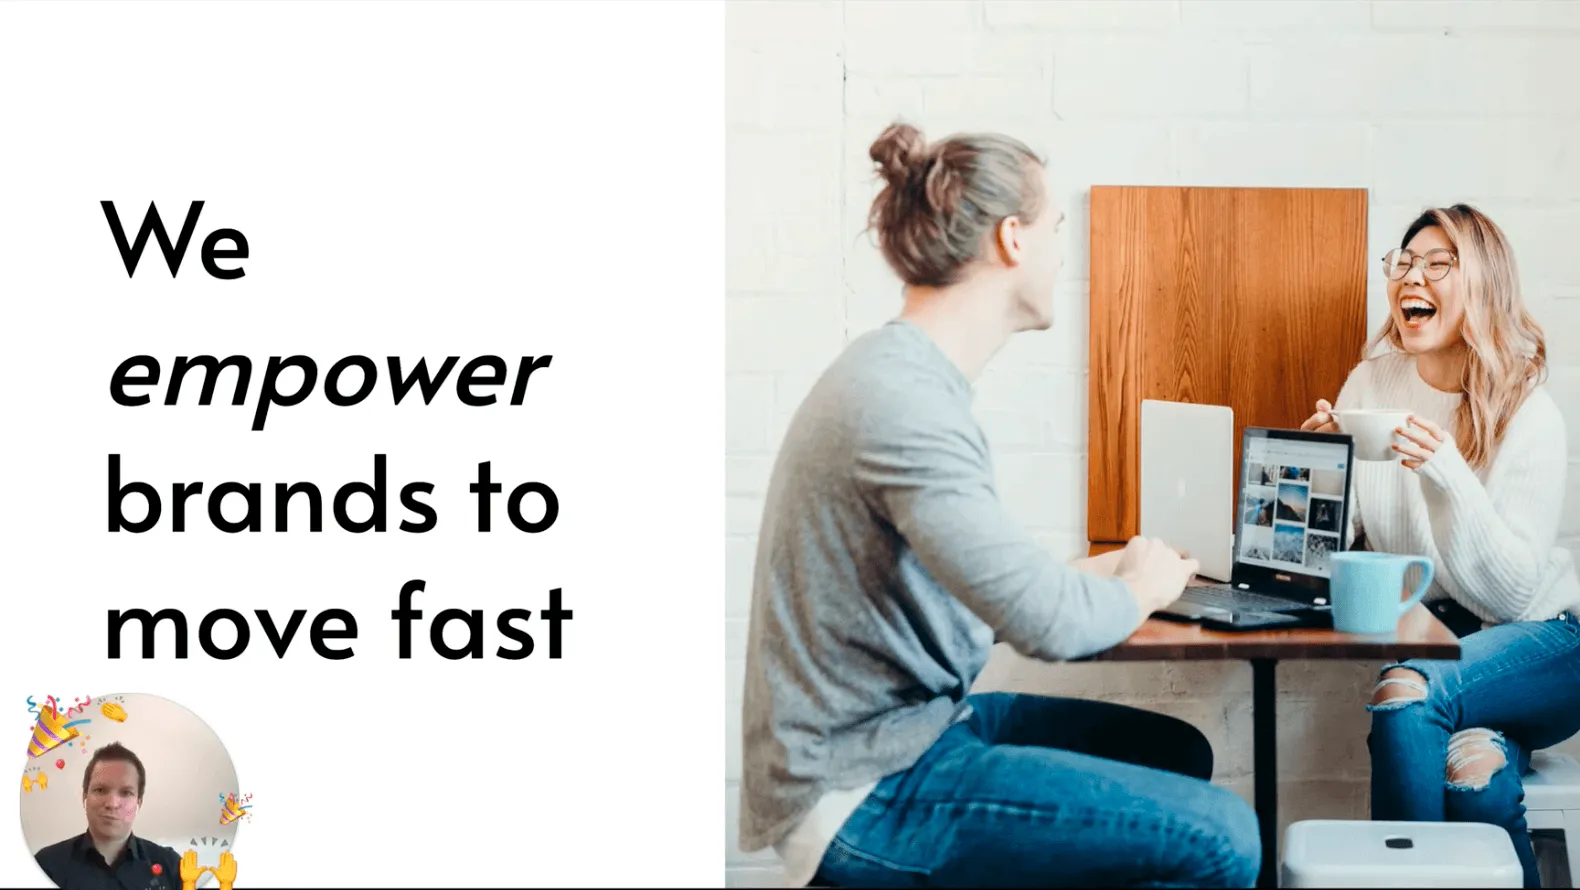 On the left side a text "We empower brands to move fast". On the right, two people sit across from each other with a notebook and a cup of coffee, laughing.